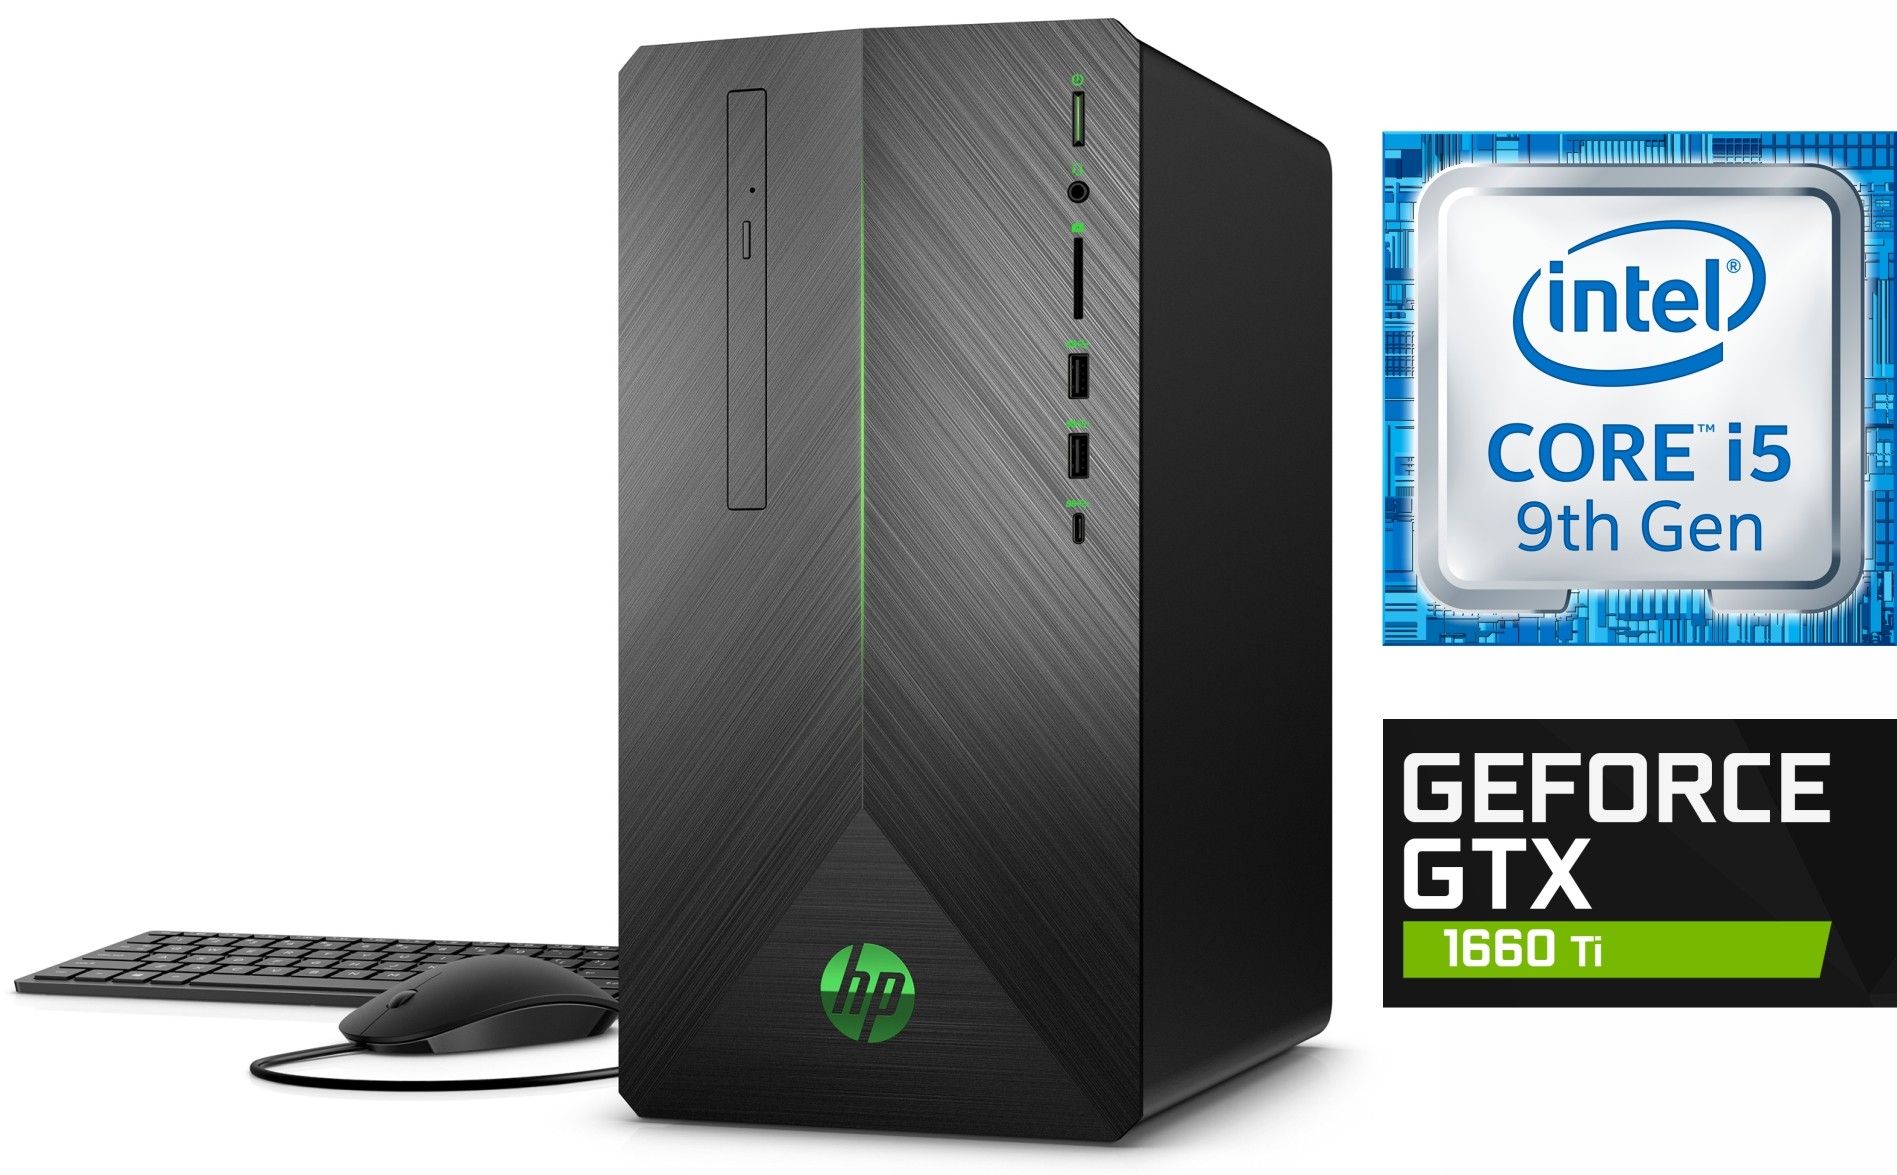 Simple How To Setup Hp Pavilion Gaming Desktop for Small Room